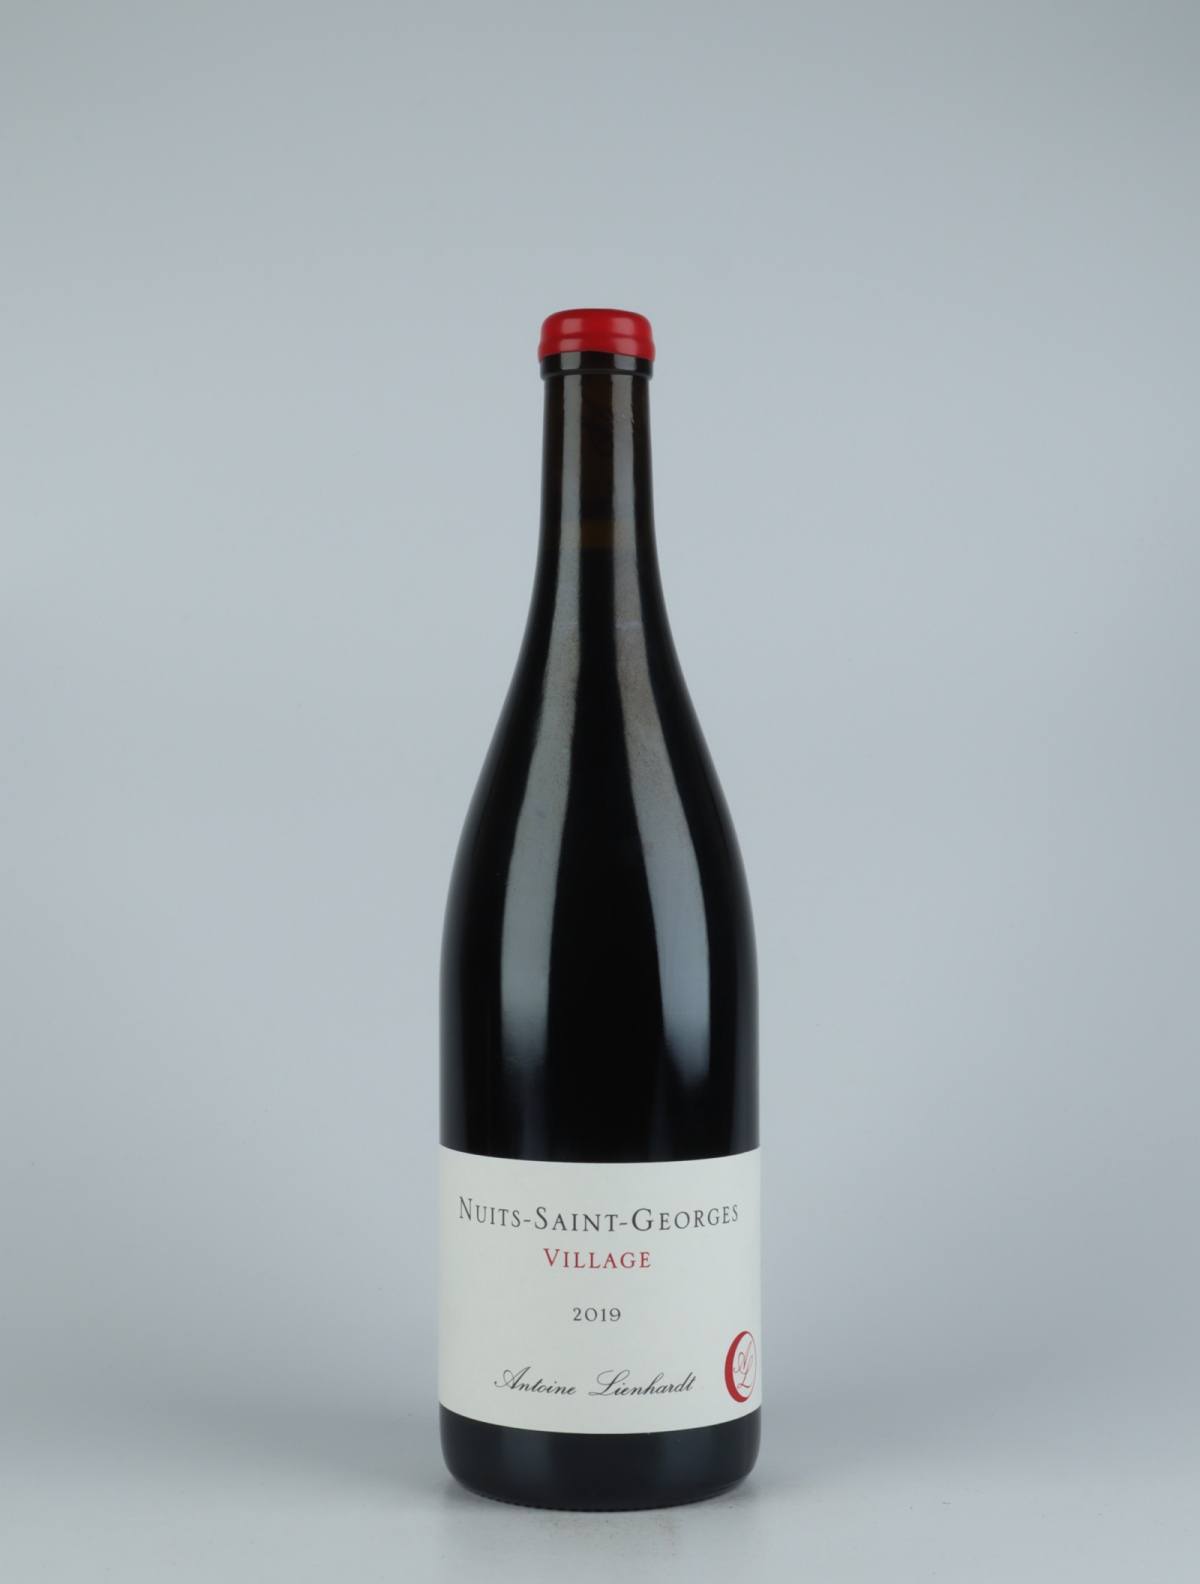 A bottle 2019 Nuits Saint Georges Red wine from Antoine Lienhardt, Burgundy in France